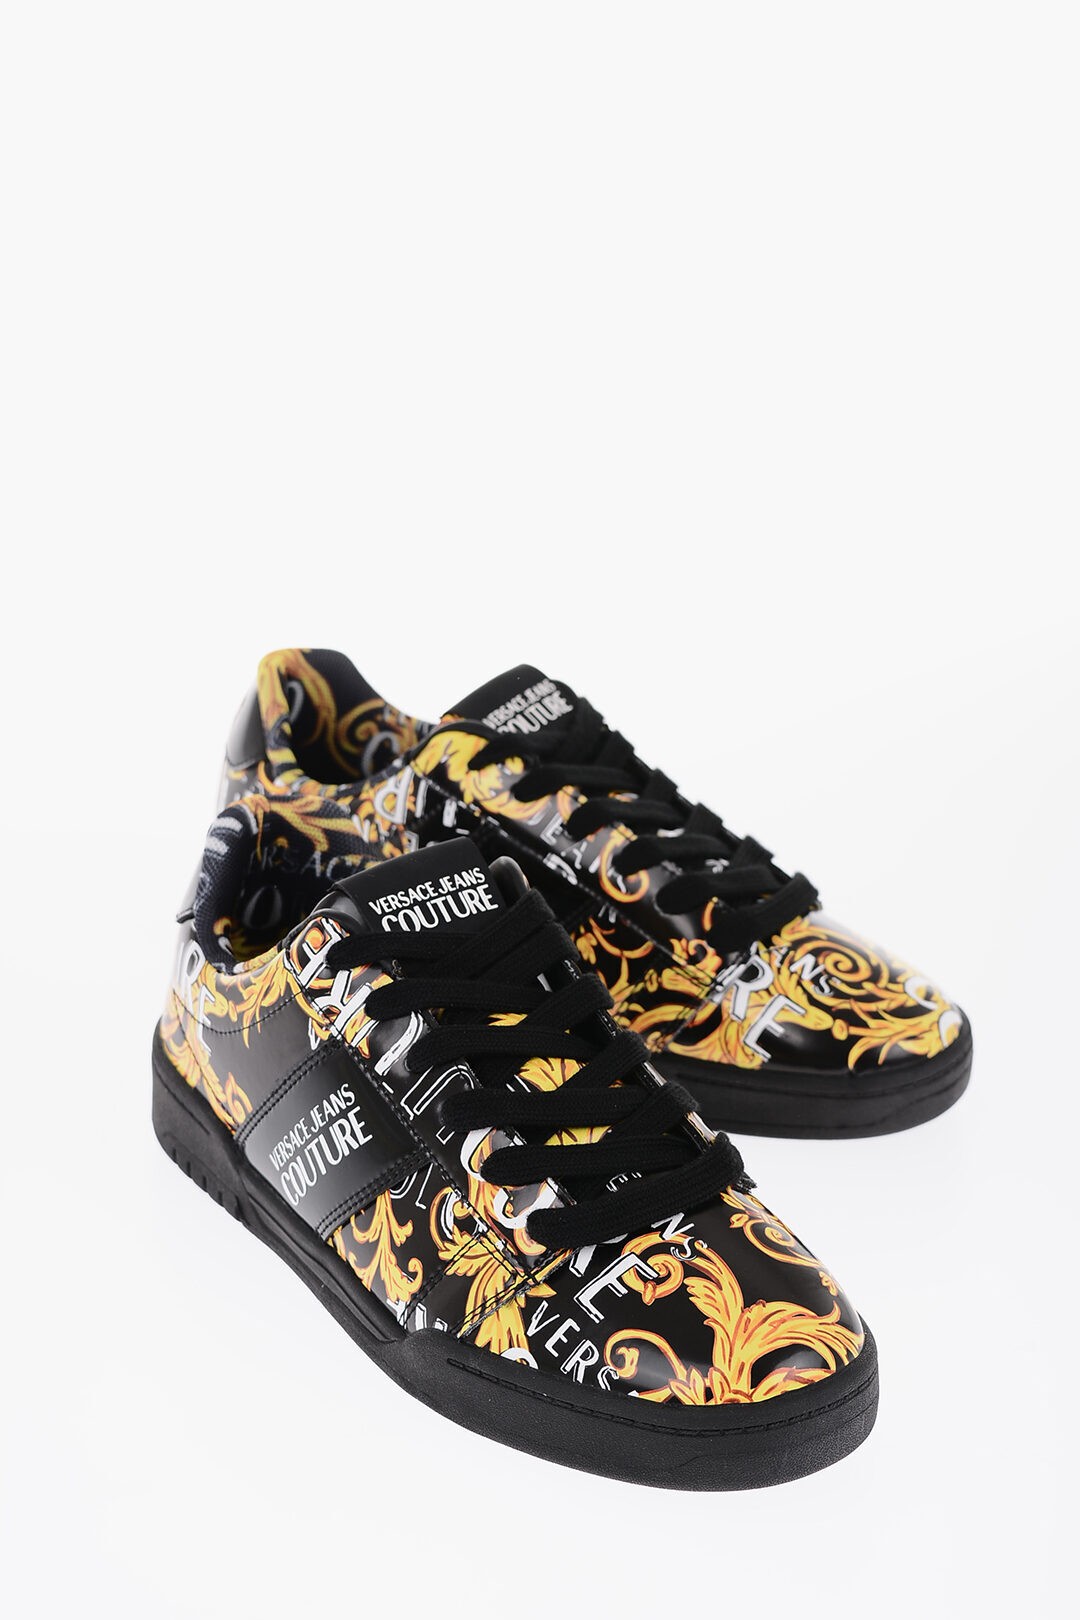 VERSACE ヴェルサーチ スニーカー 74YA3SD5 ZP218 G89 メンズ JEANS COUTURE BAROQUE MOTIF PATENT LEATHER BROOKLYN LOW-TOP 【関税・送料無料】【ラッピング無料】 dk